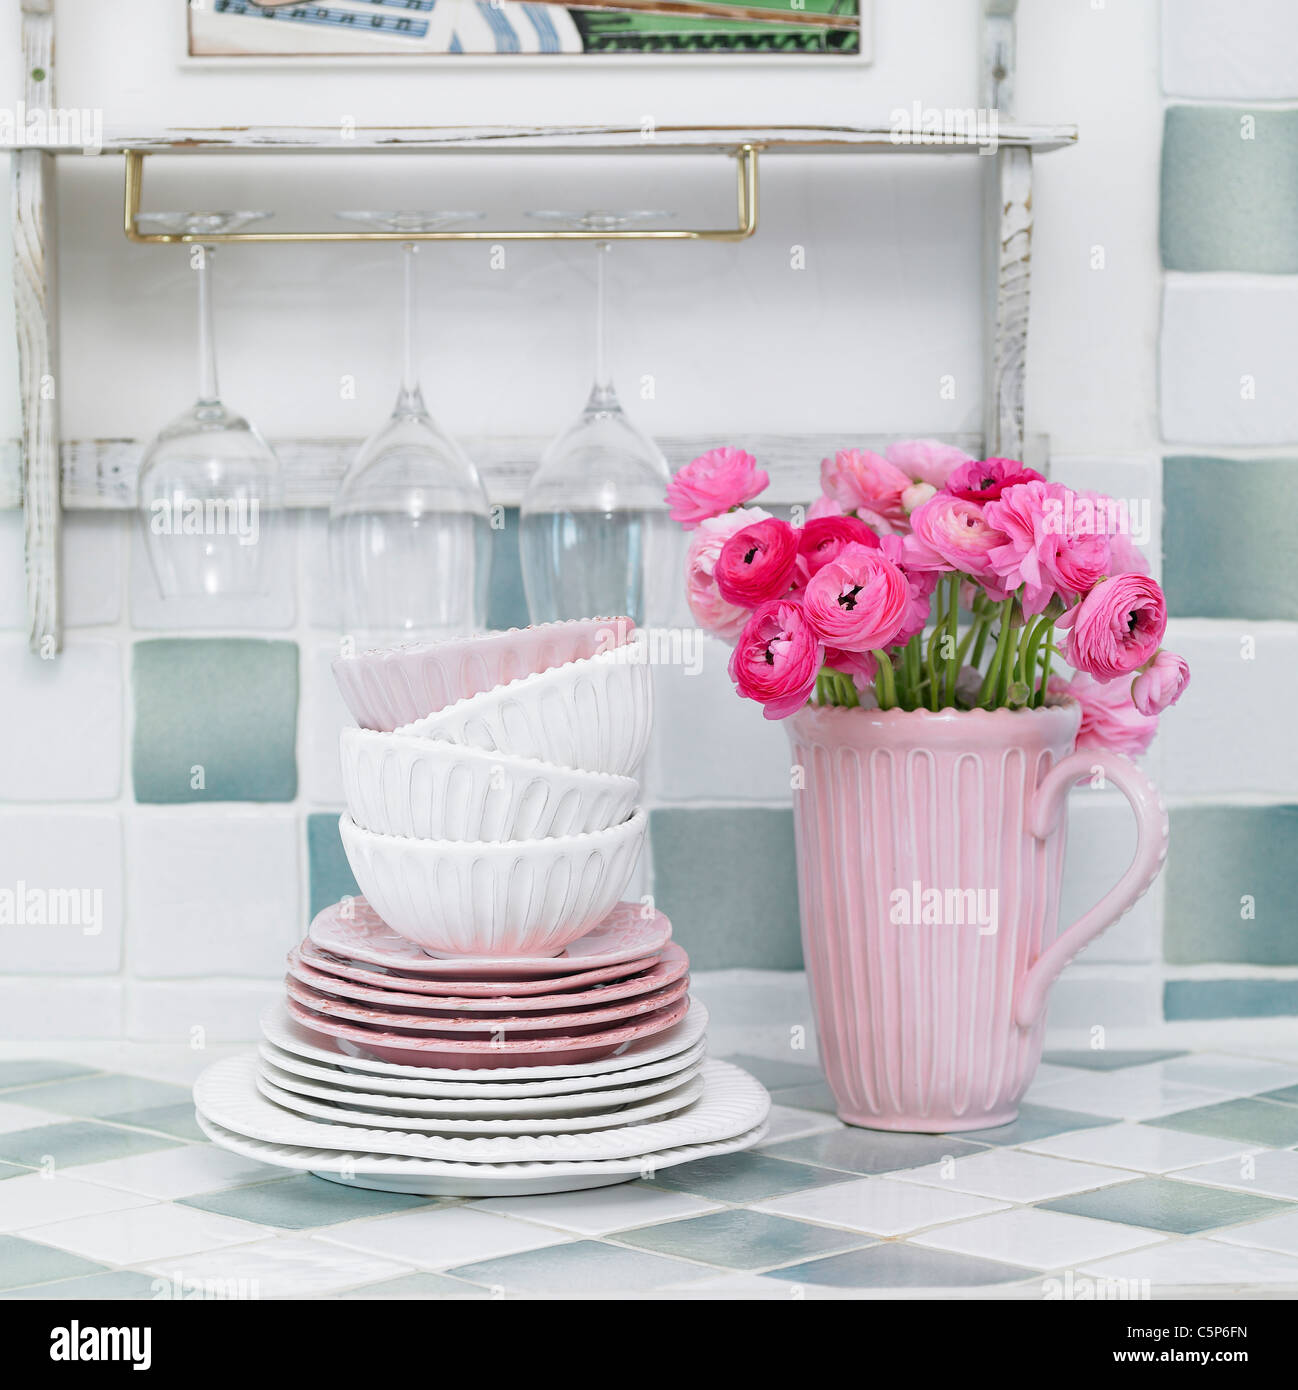 Dishes, vase and other objects Stock Photo